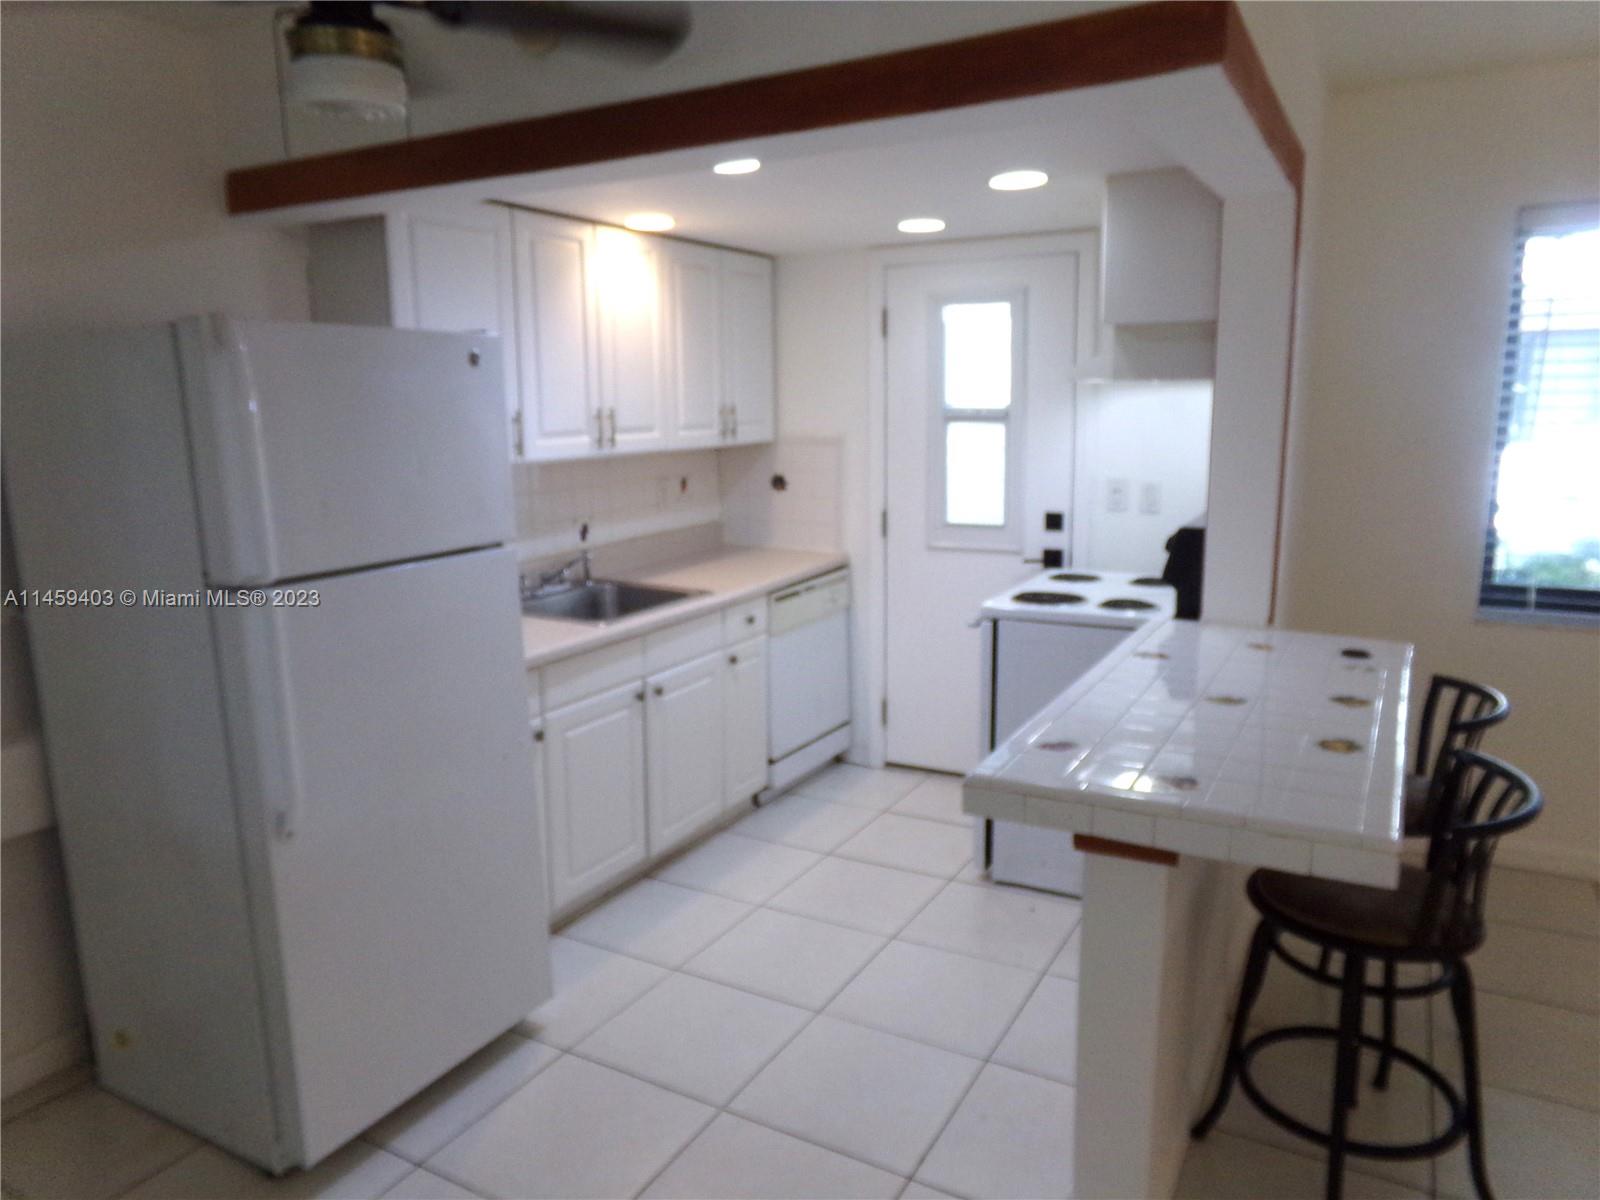 3242 Mary St S114, Miami, Florida 33133, 1 Bedroom Bedrooms, ,1 BathroomBathrooms,Residentiallease,For Rent,3242 Mary St S114,A11459403